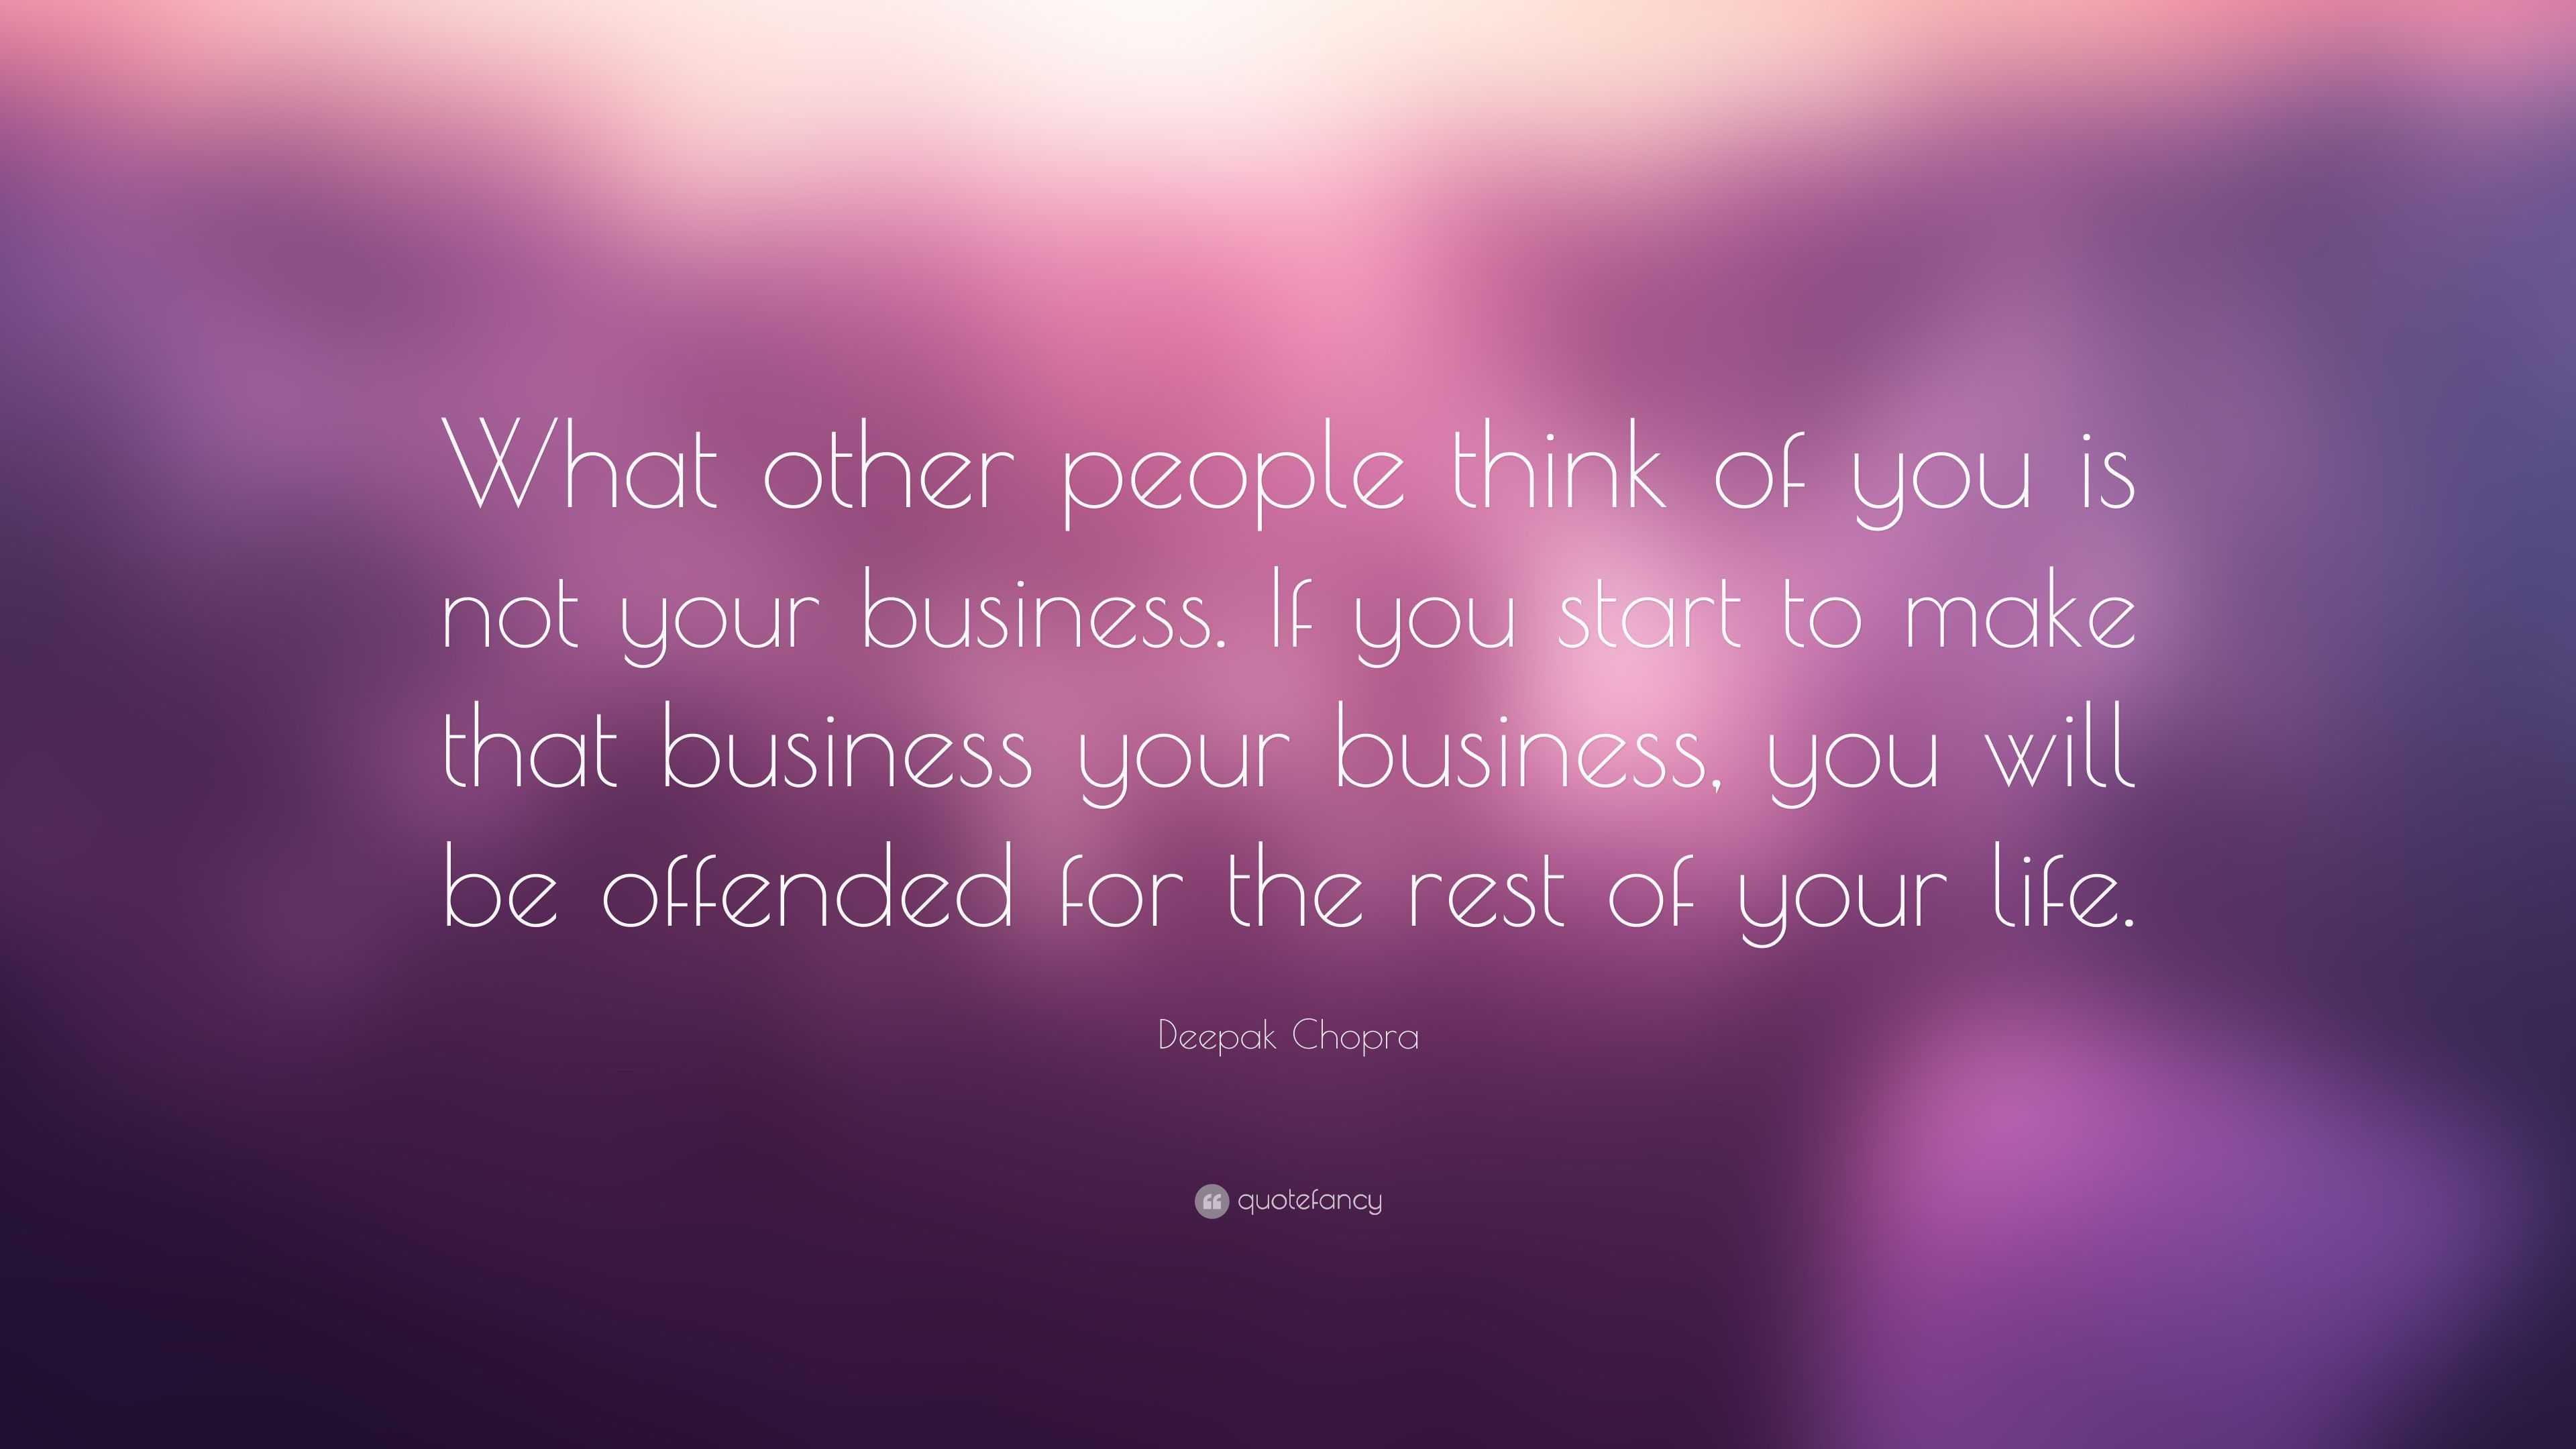 Deepak Chopra Quote: “What other people think of you is not your ...